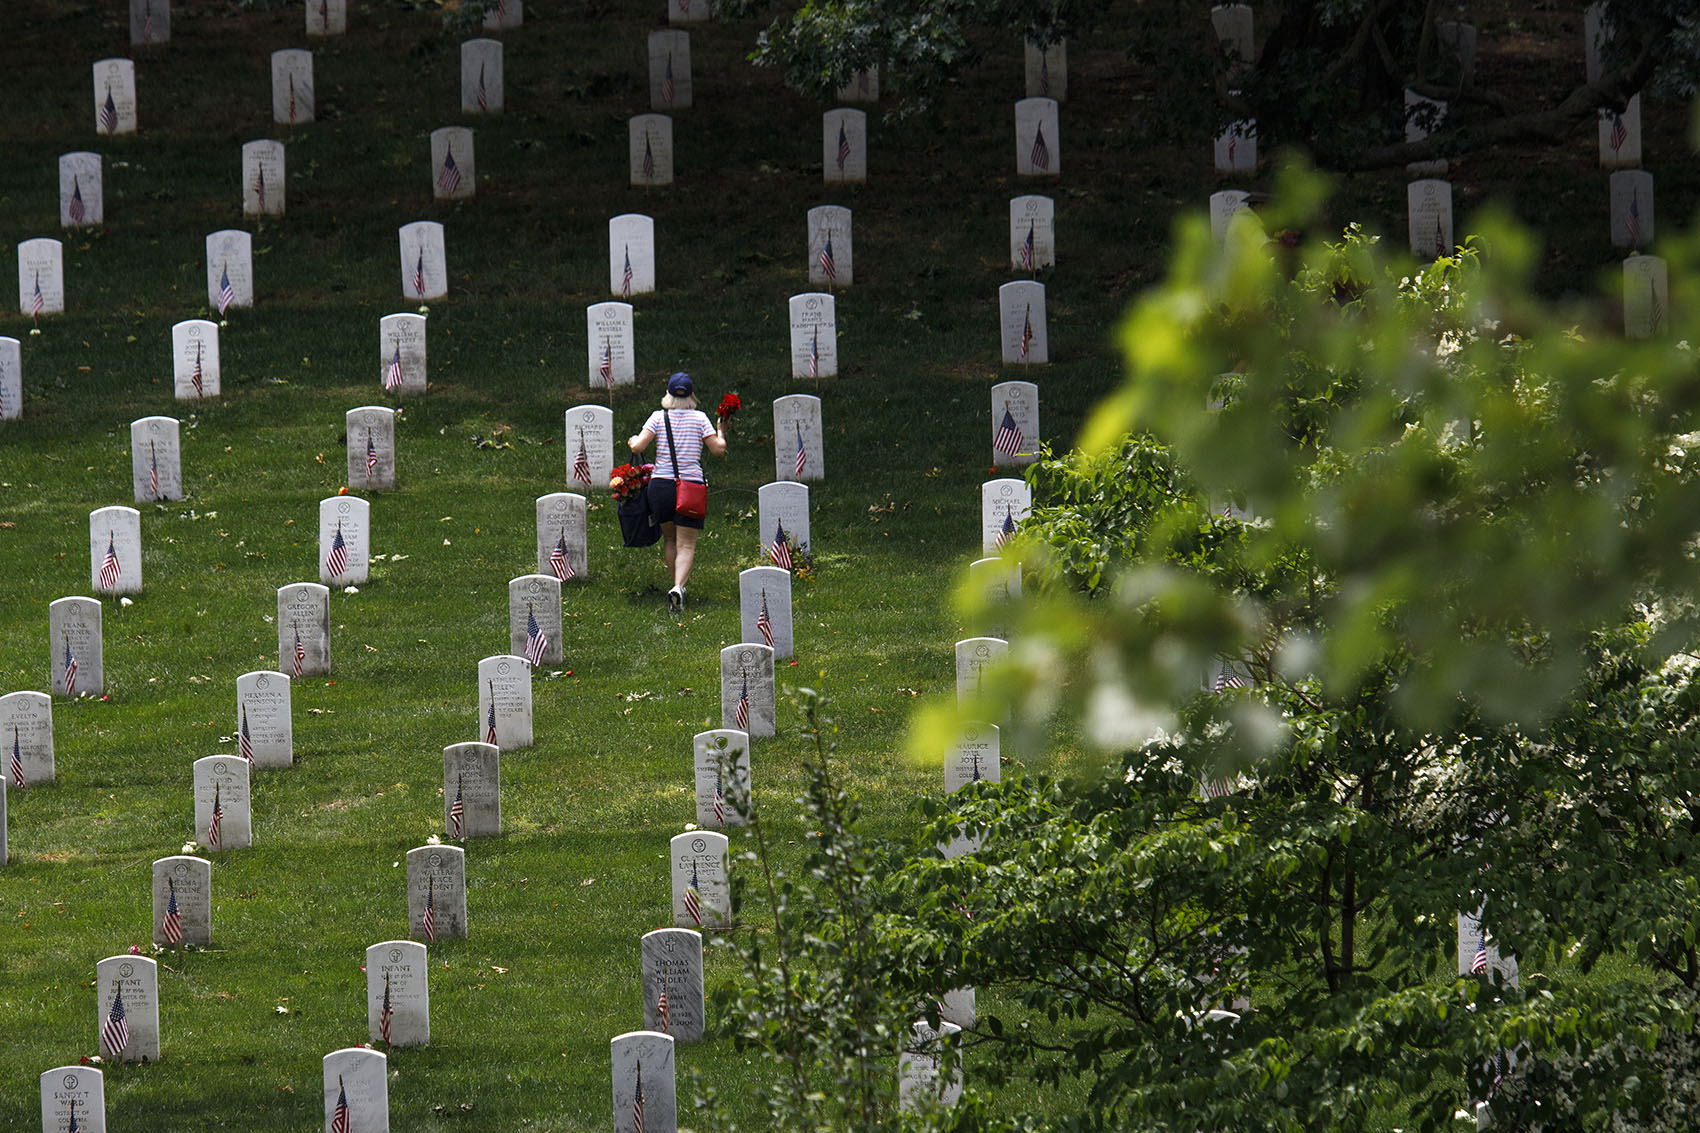 A volunteer places flowers at the base of tombstones during an event at Arlington National Cemetery in in Arlington, Va., ahead of Memorial Day. (Tom Brenner/Getty Images)